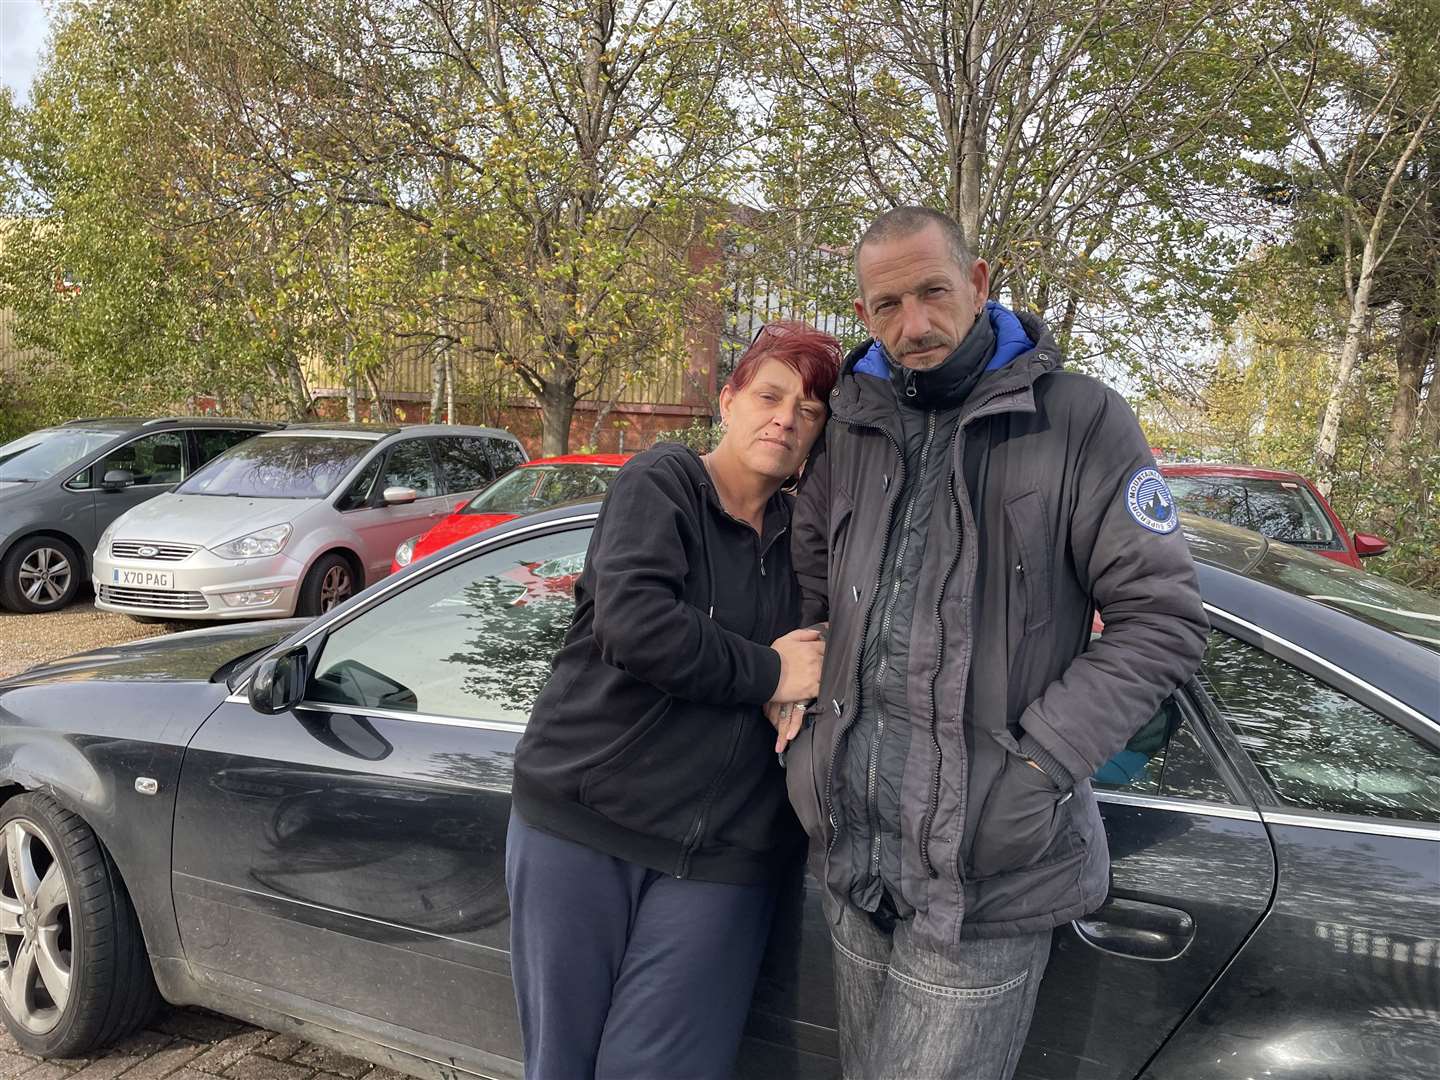 The couple were living in their car at the start of November